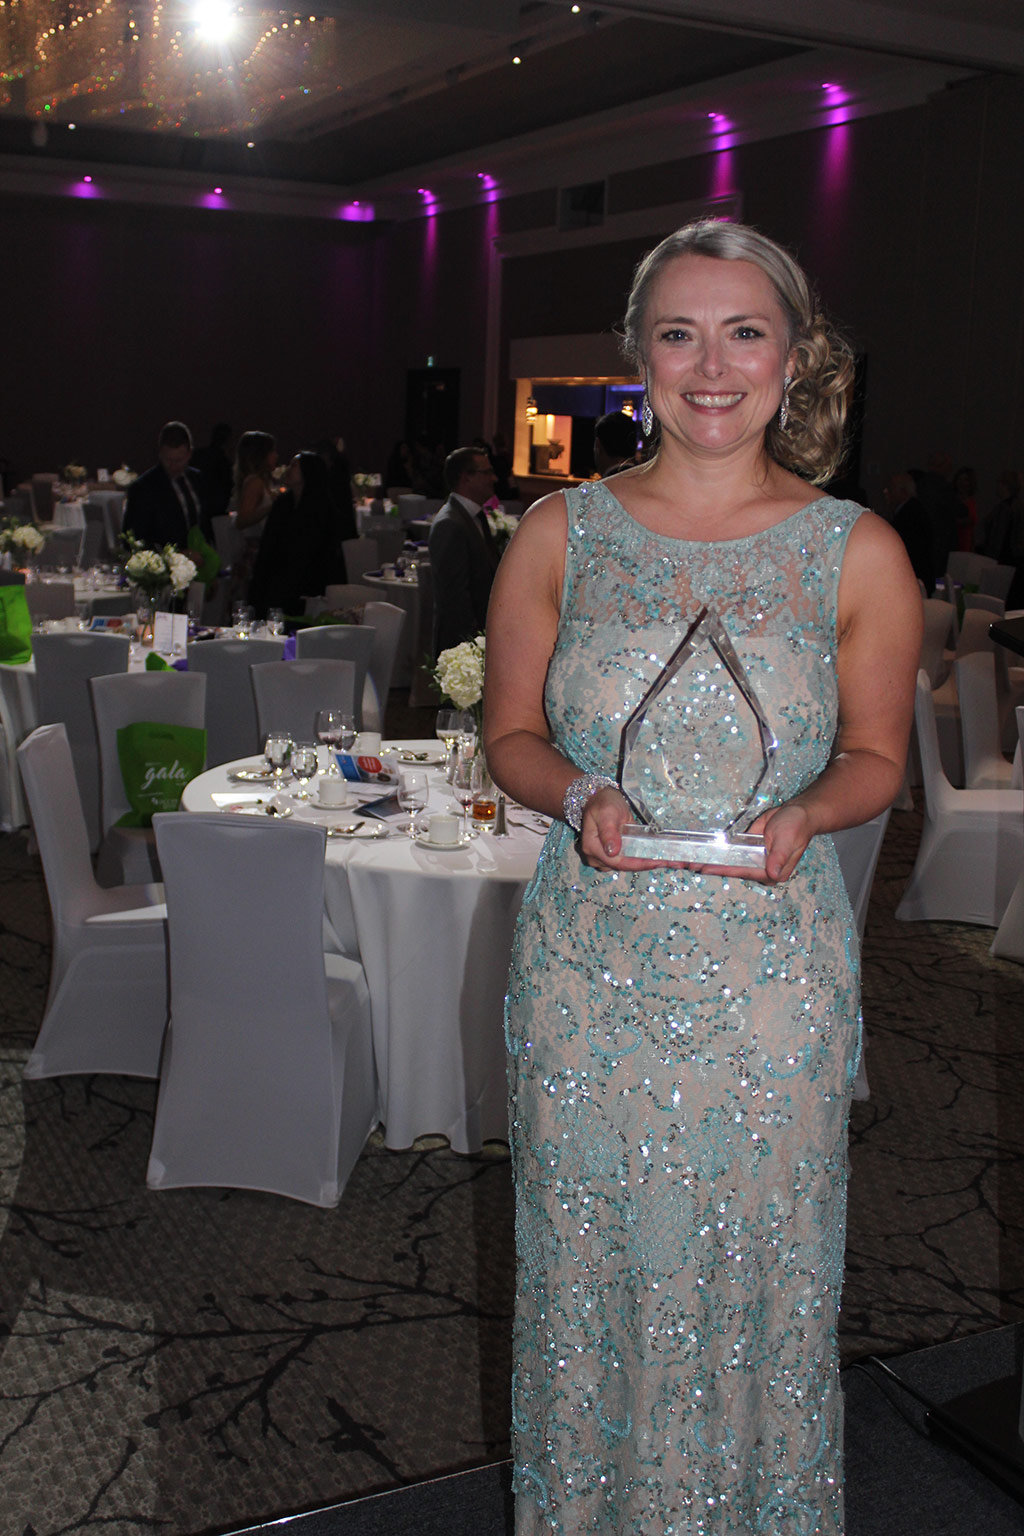 Candace Enman named Businesswoman of the Year!